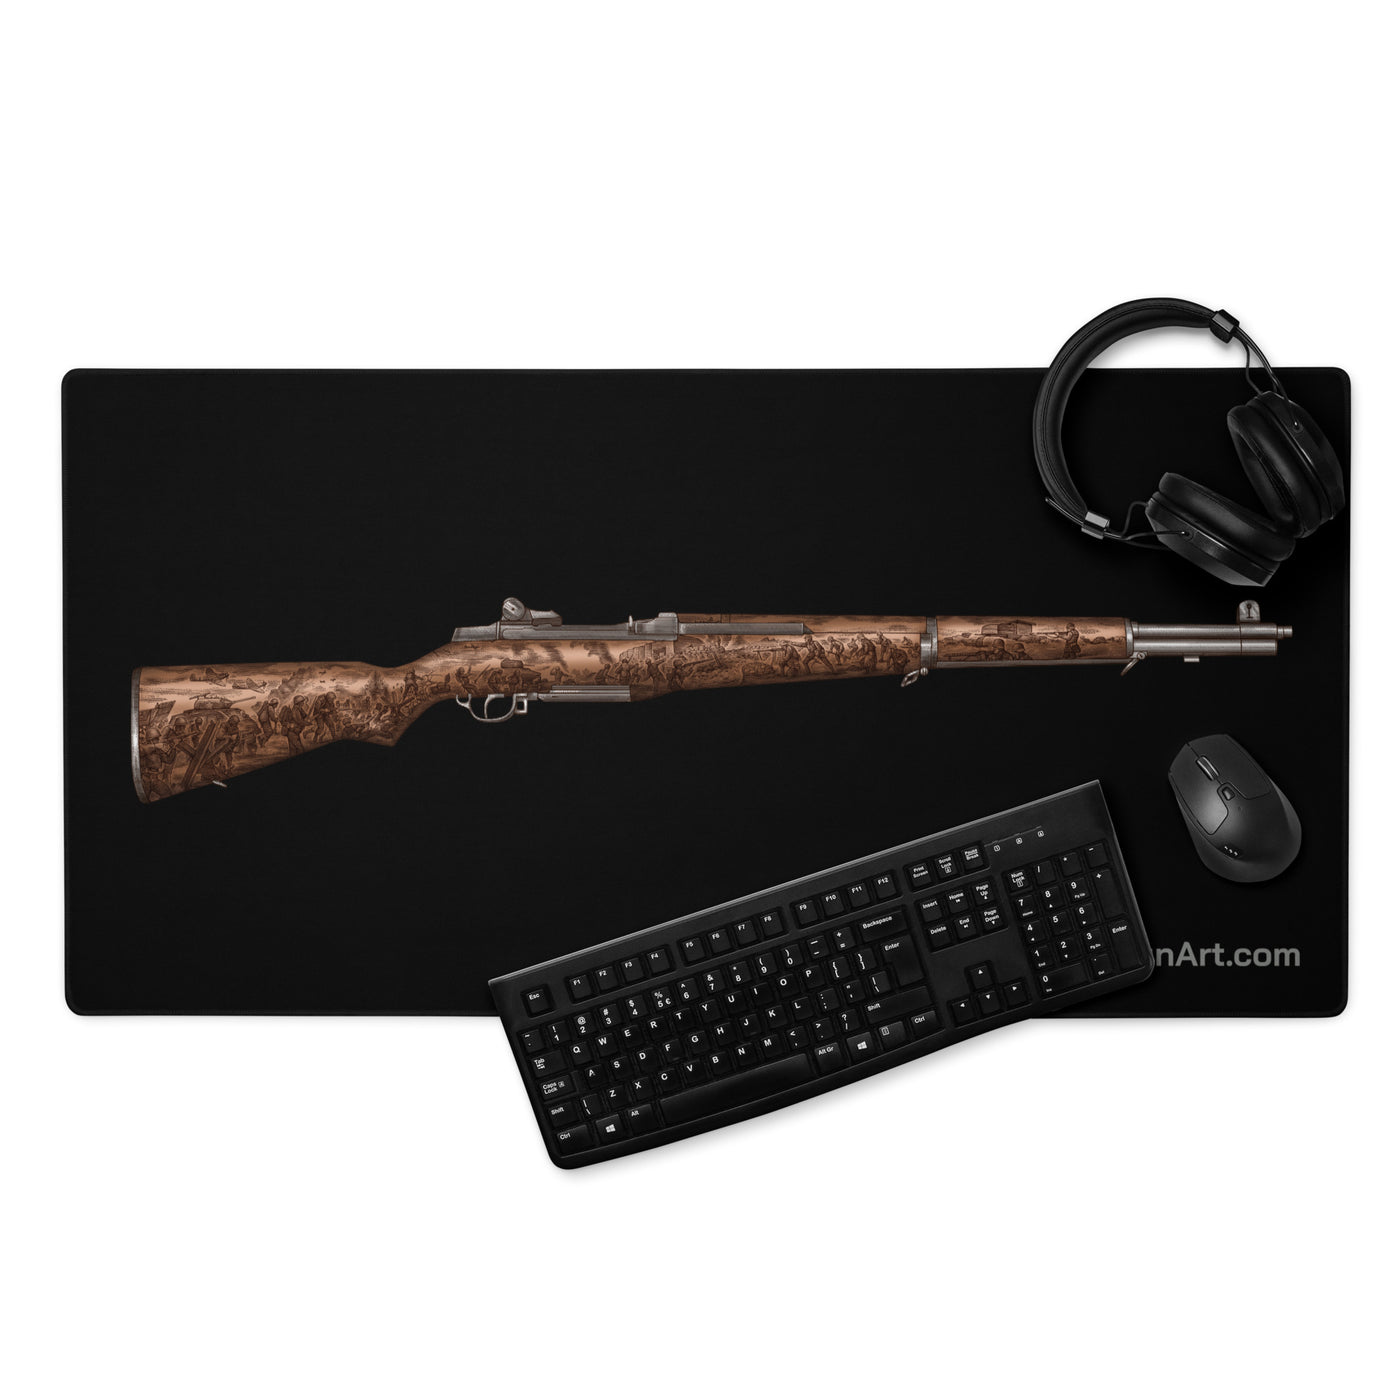 Honoring The Brave / M1 Garand / World War II D-Day Gaming Mouse Pad - Black Background